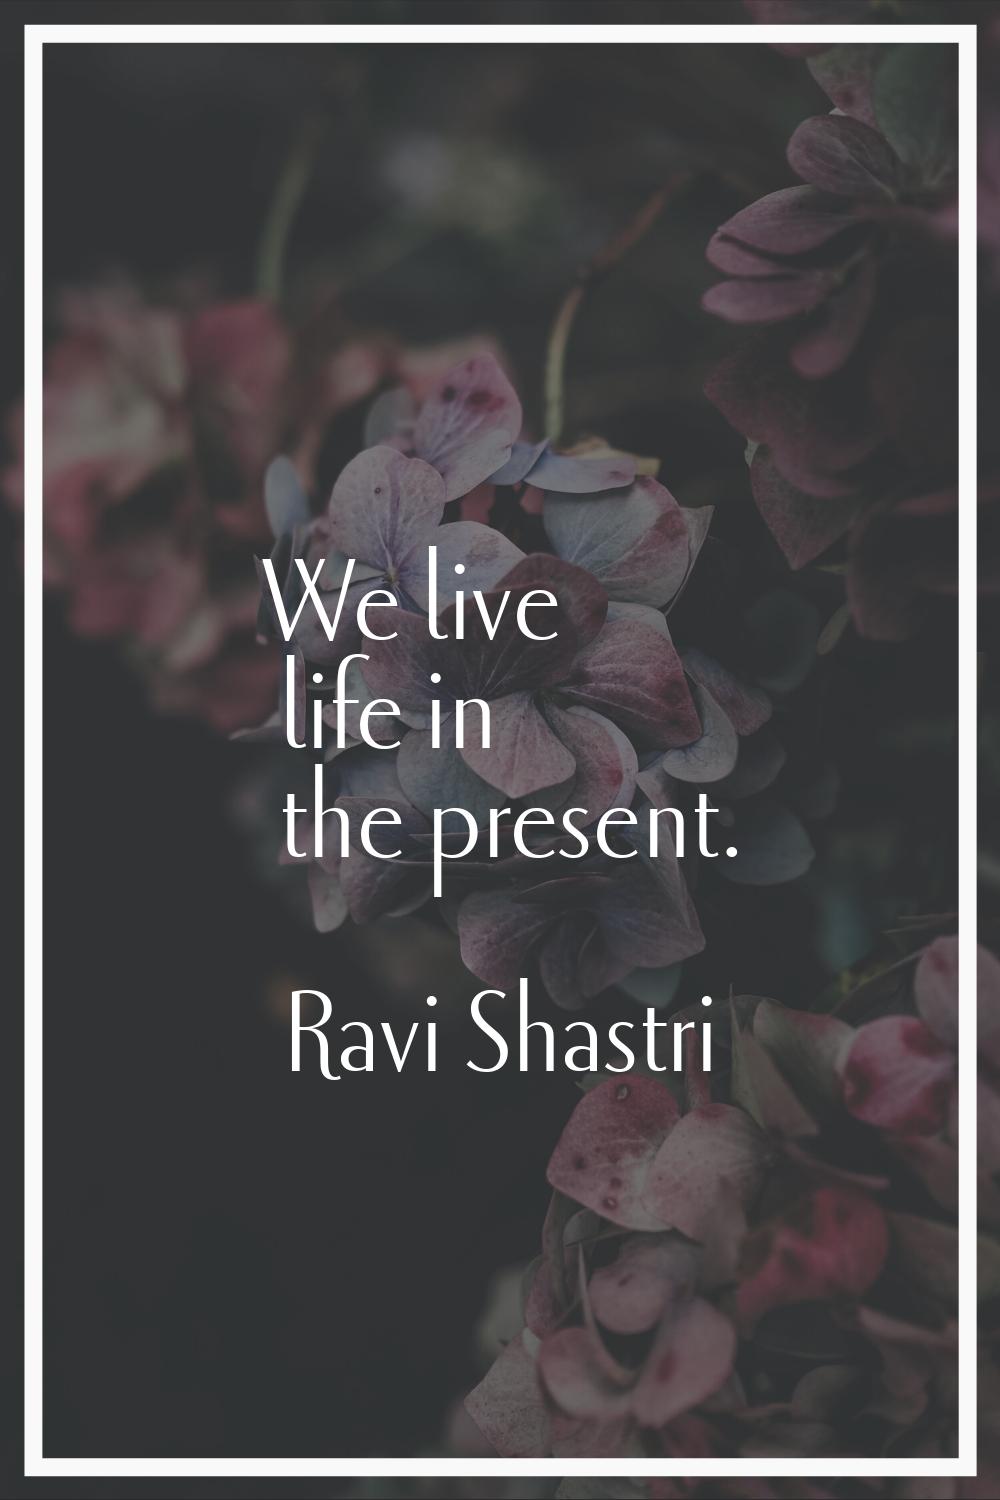 We live life in the present.